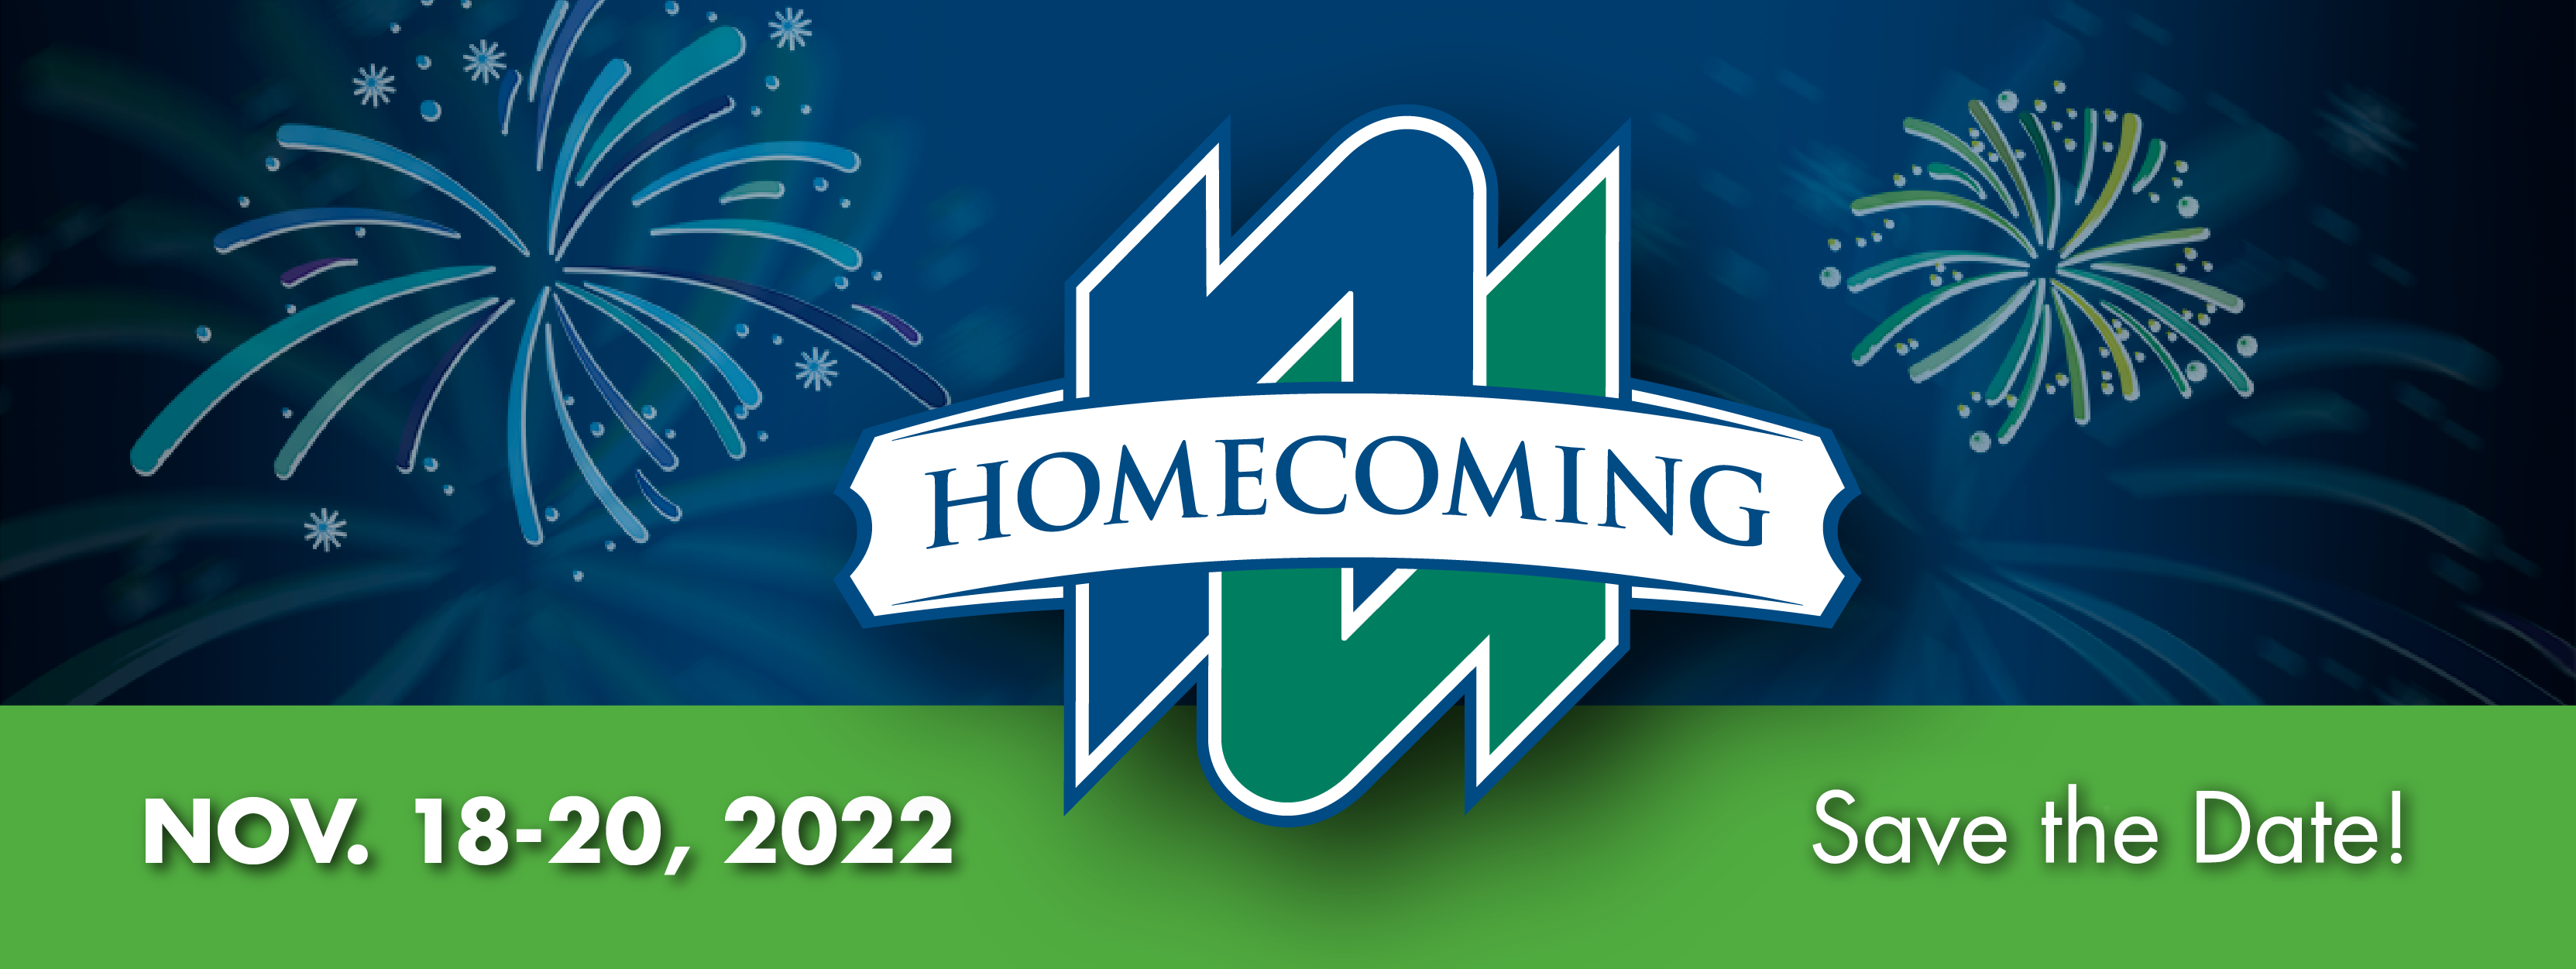 Homecoming 2022 page banner